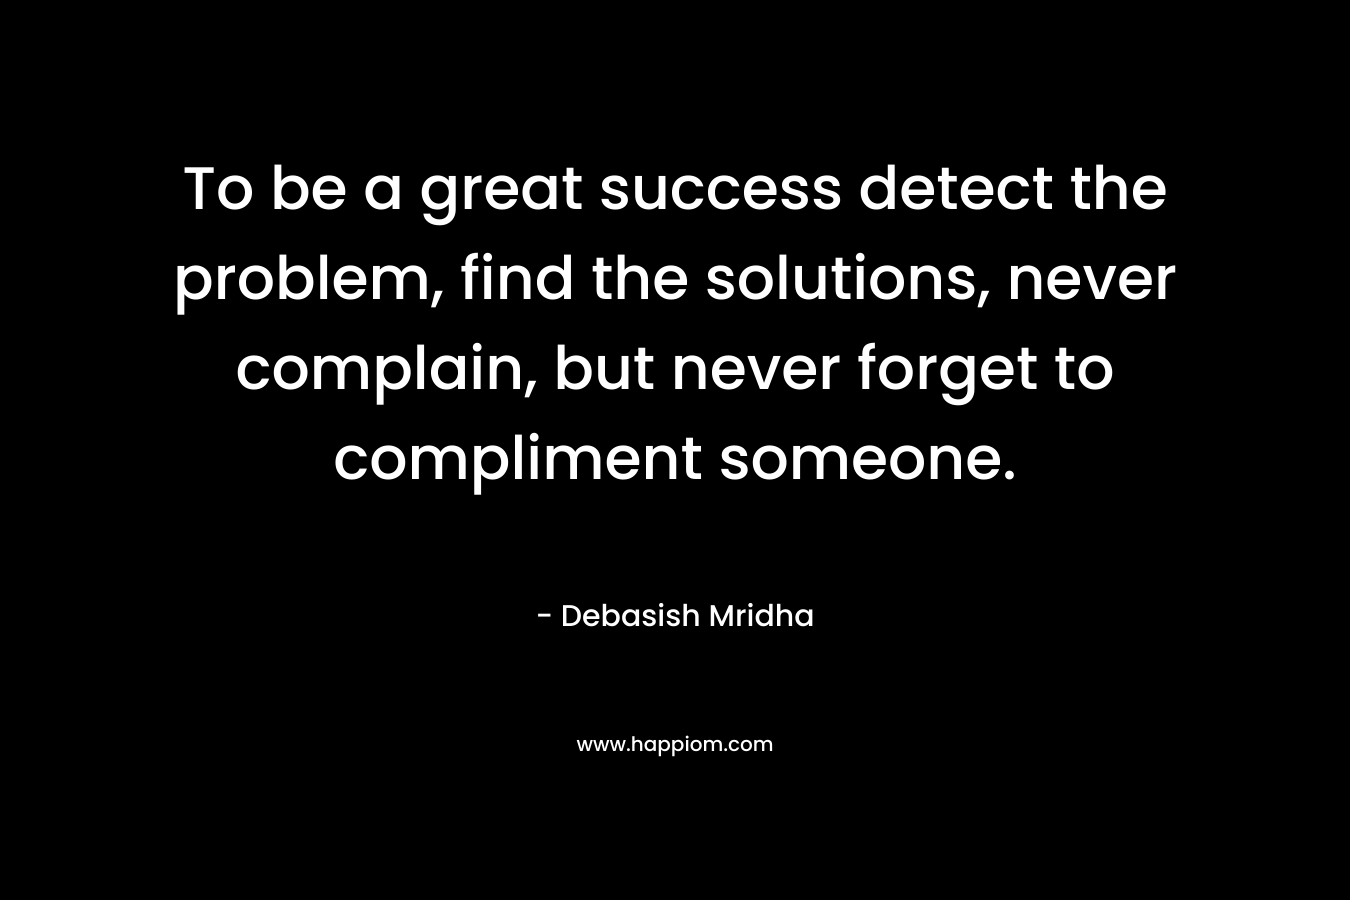 To be a great success detect the problem, find the solutions, never complain, but never forget to compliment someone.